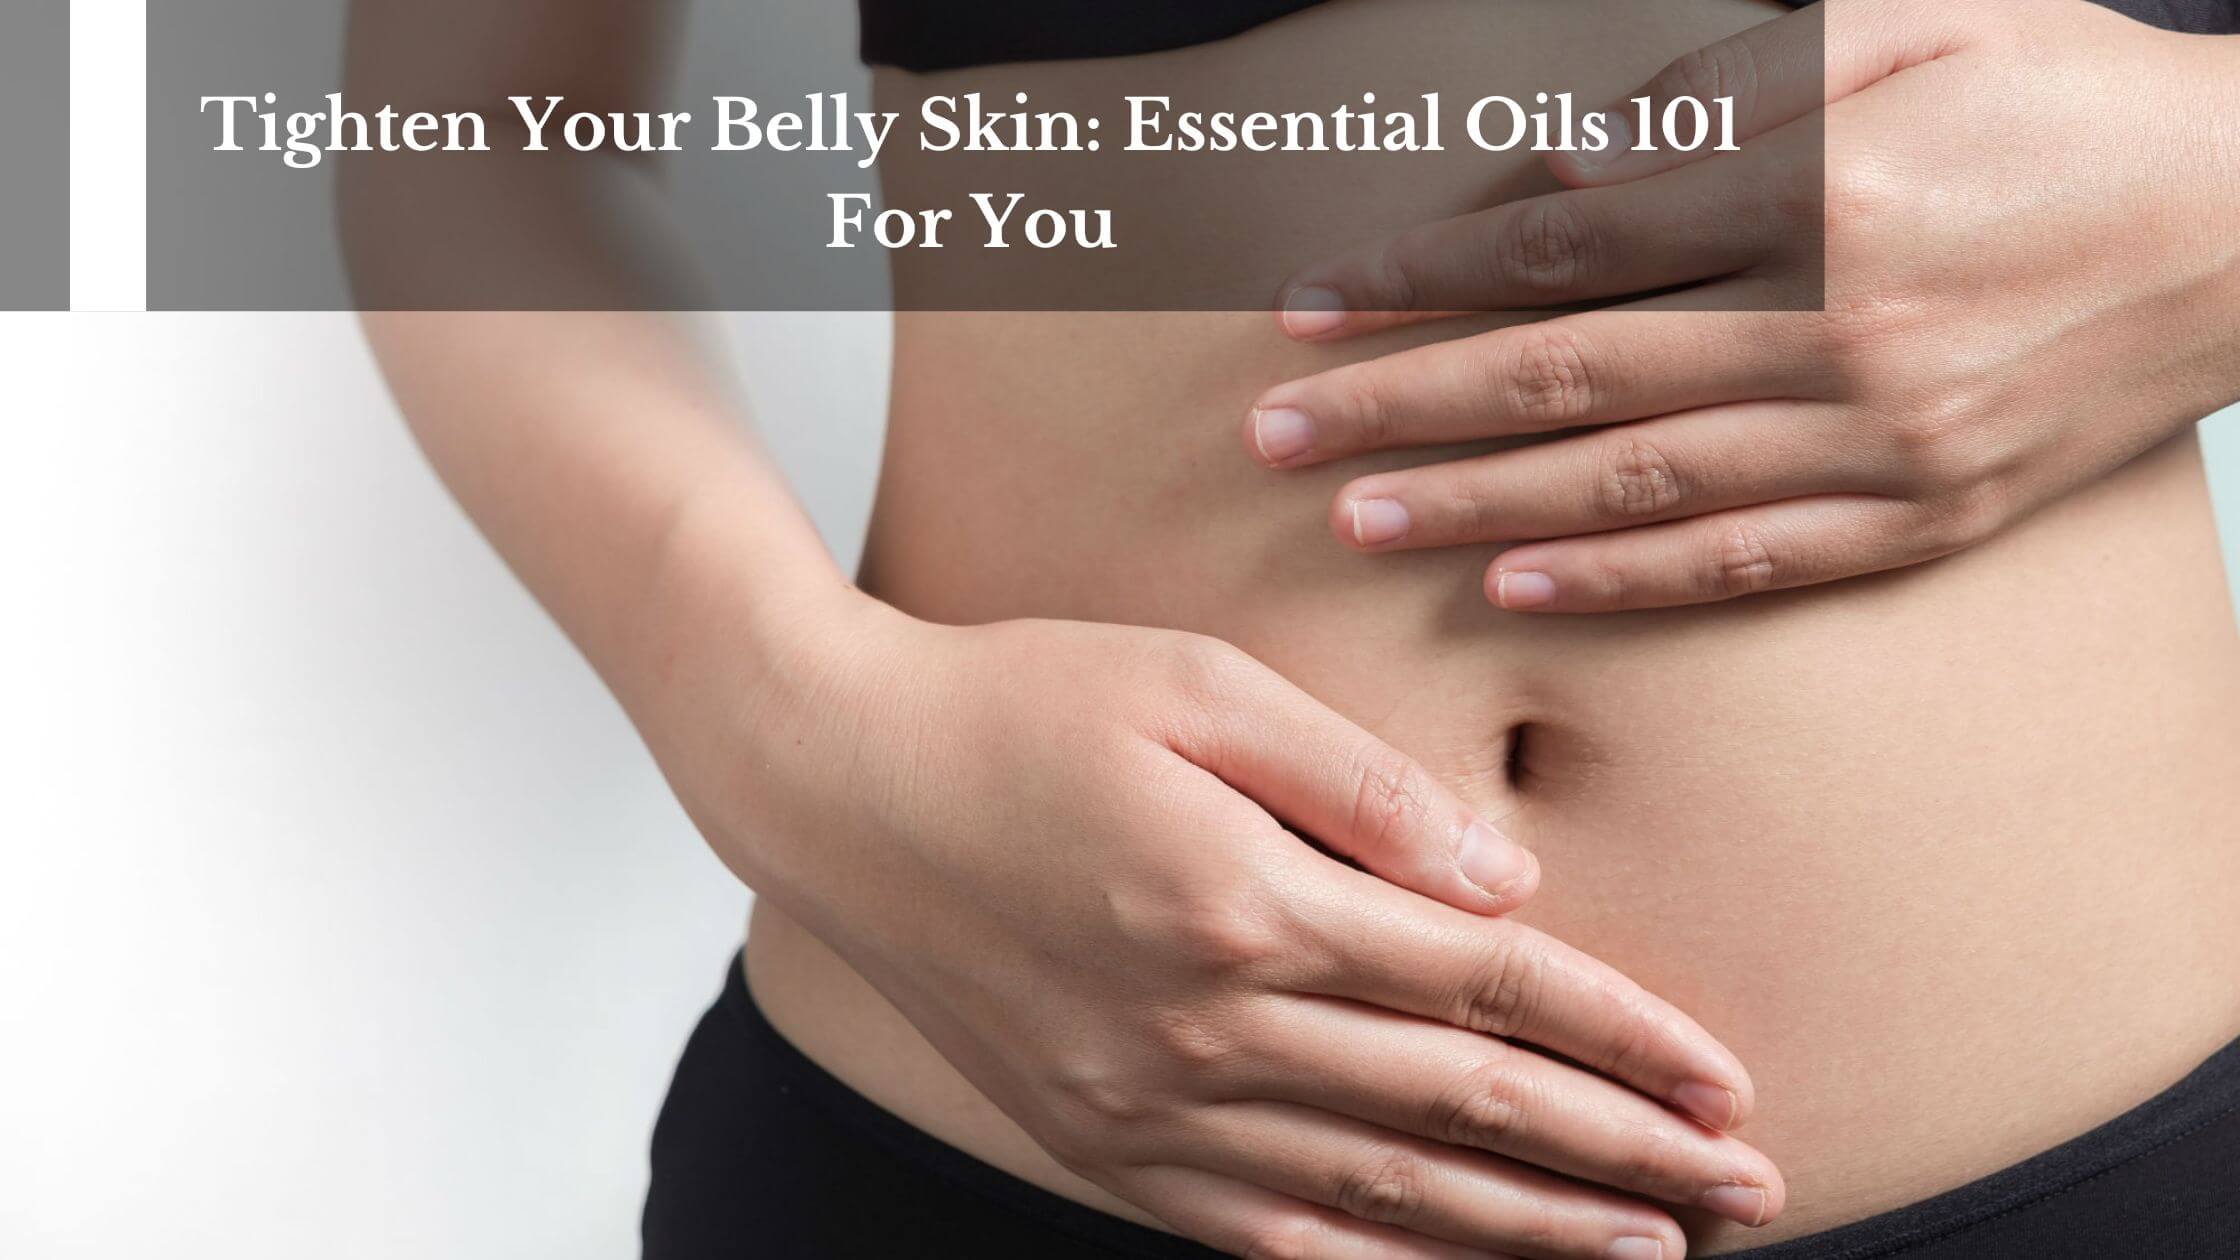 10 Best Essential Oils For Belly Button - Applying Oils To Navel